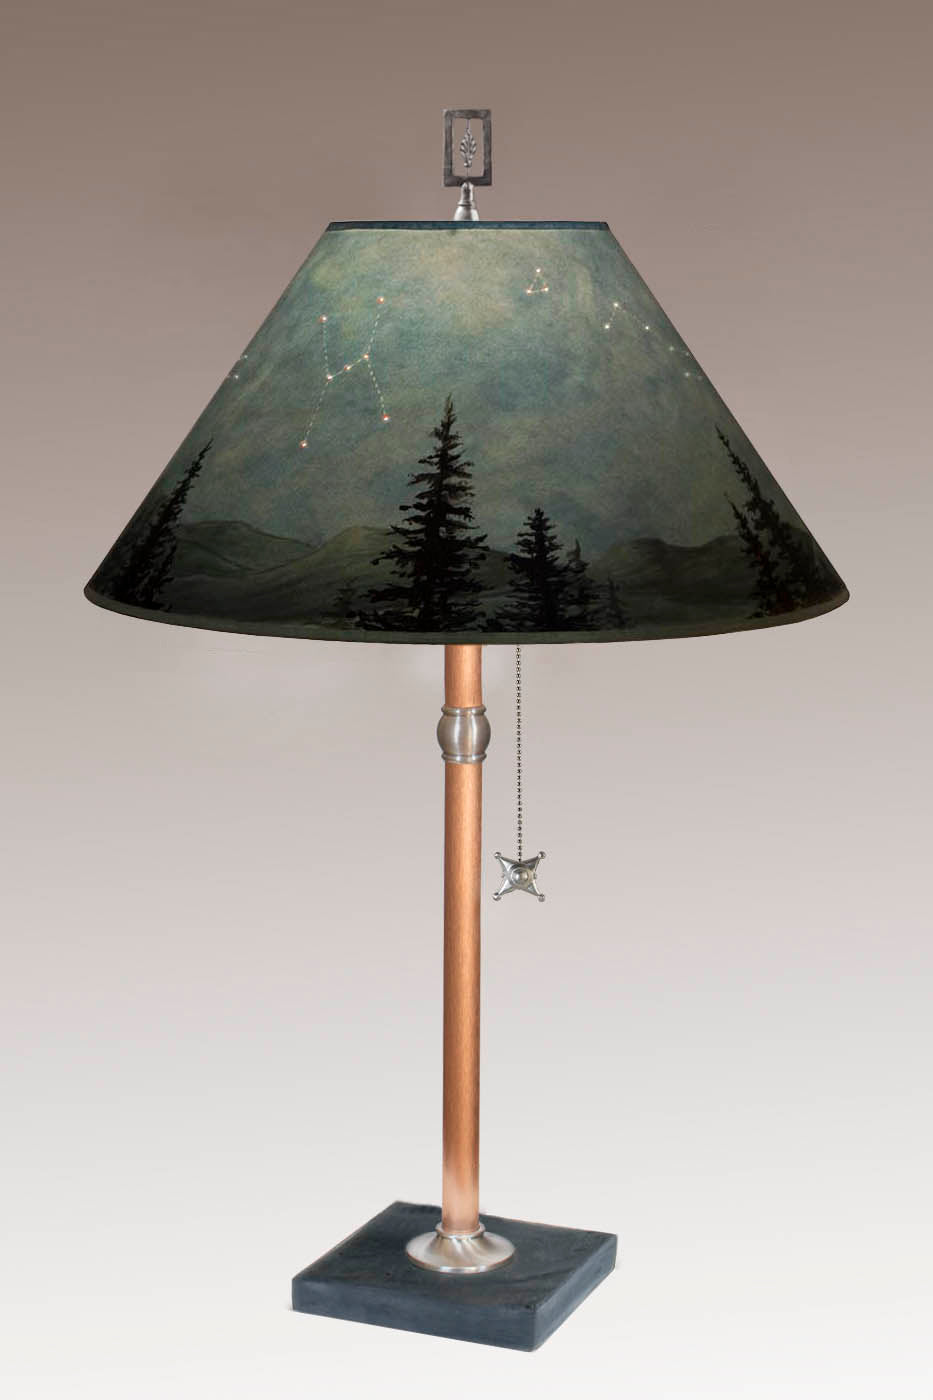 Copper Table Lamp with Large Conical Shade in Midnight Sky